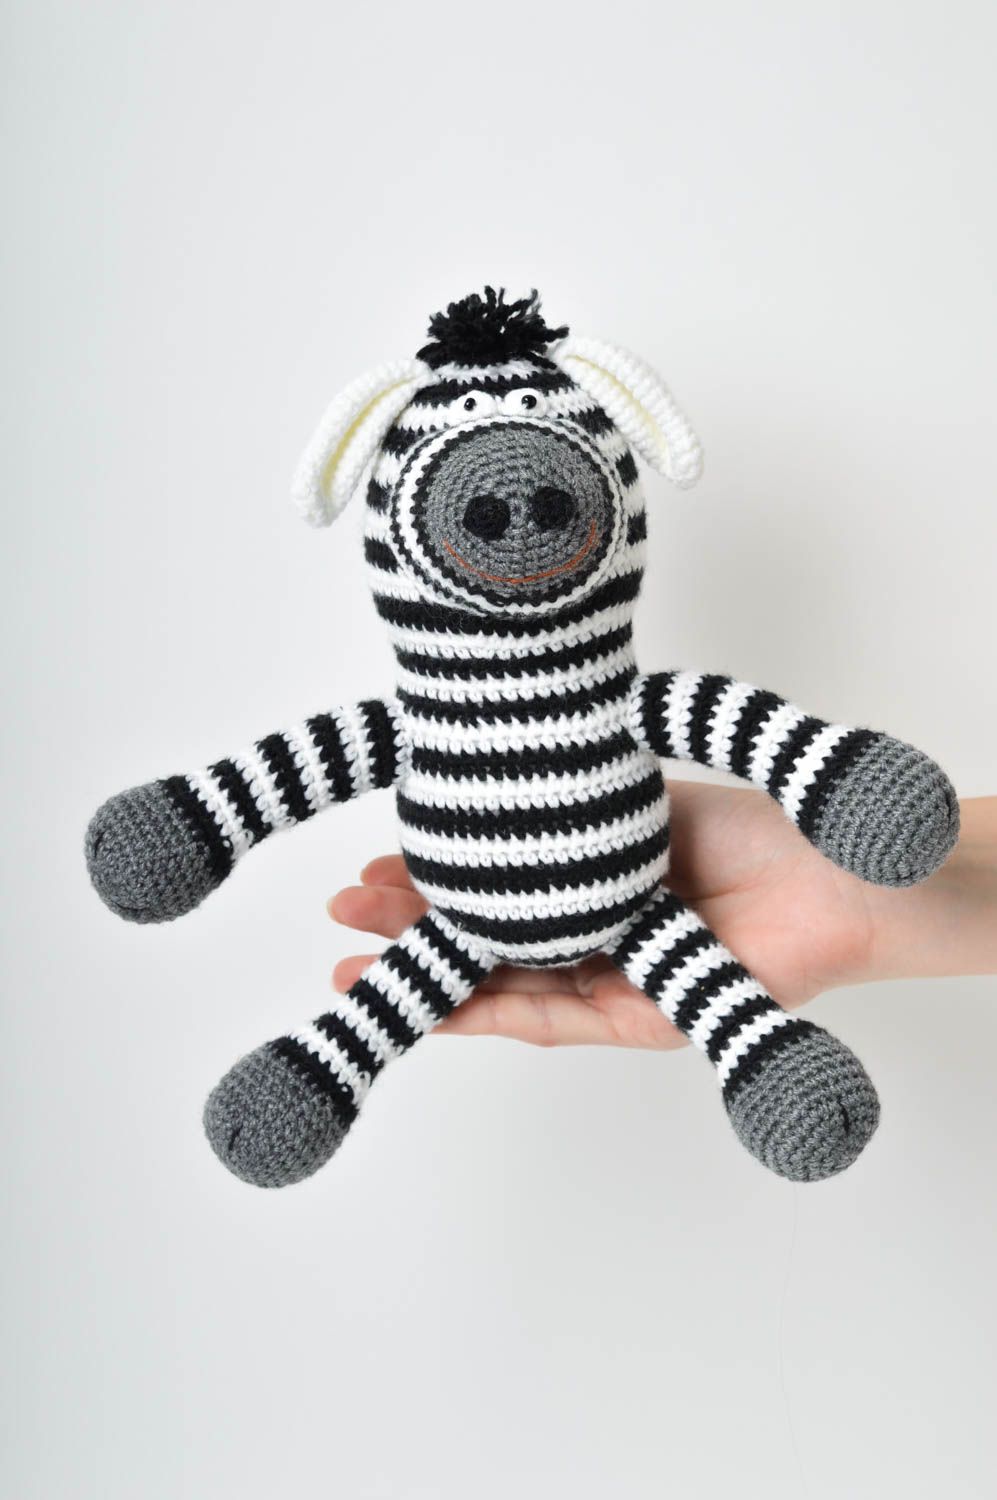 Handmade toy small zebra soft toy decorative crocheted toy striped crocheted toy photo 2